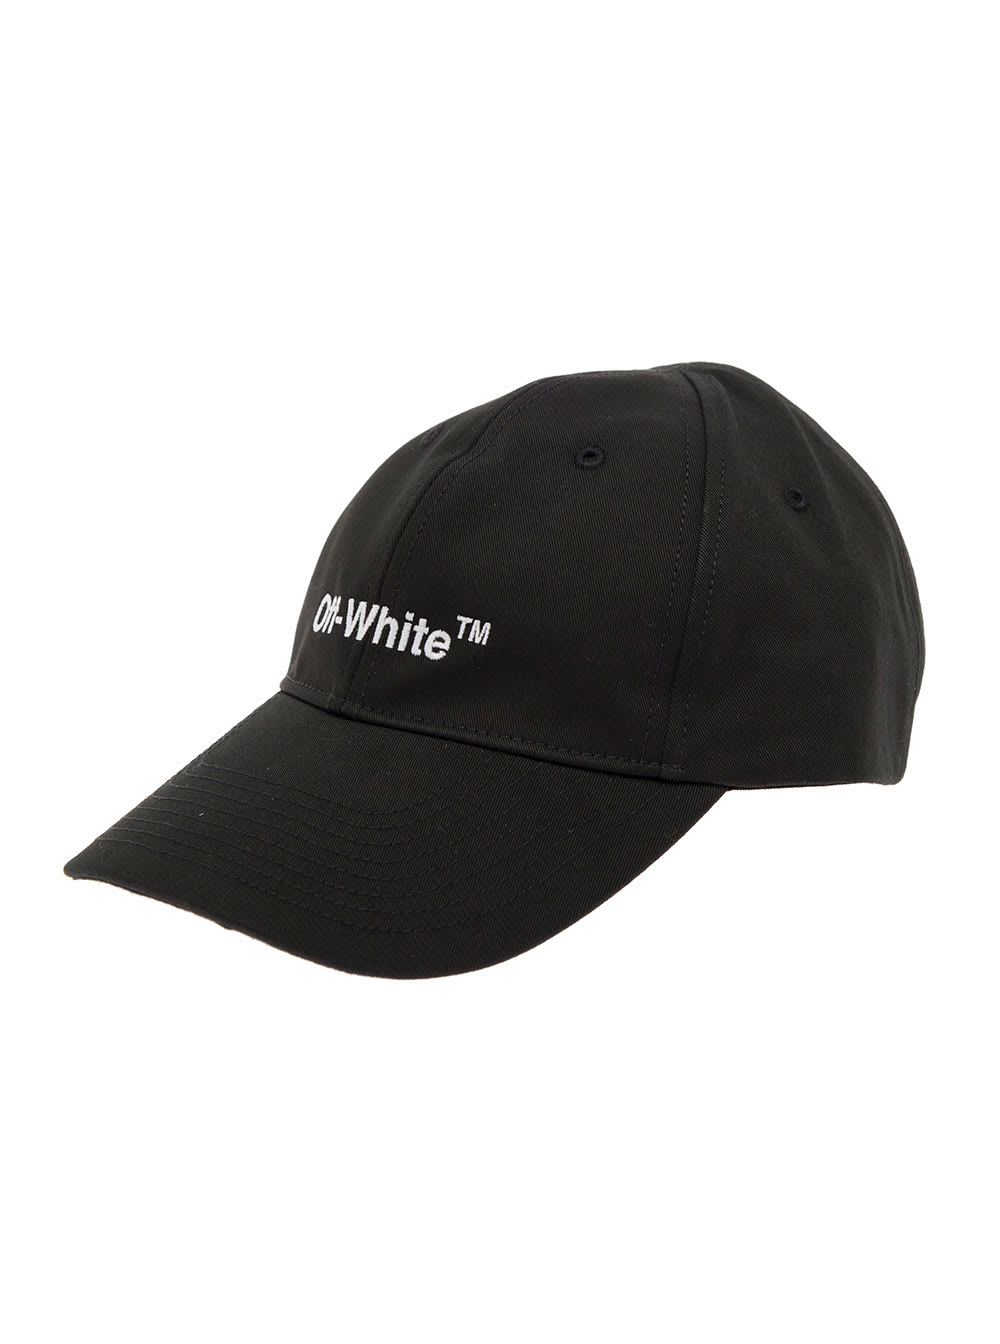 OFF-WHITE OFF WHITE MANS BLACK COTTON HELVETICA HAT WITH LOGO